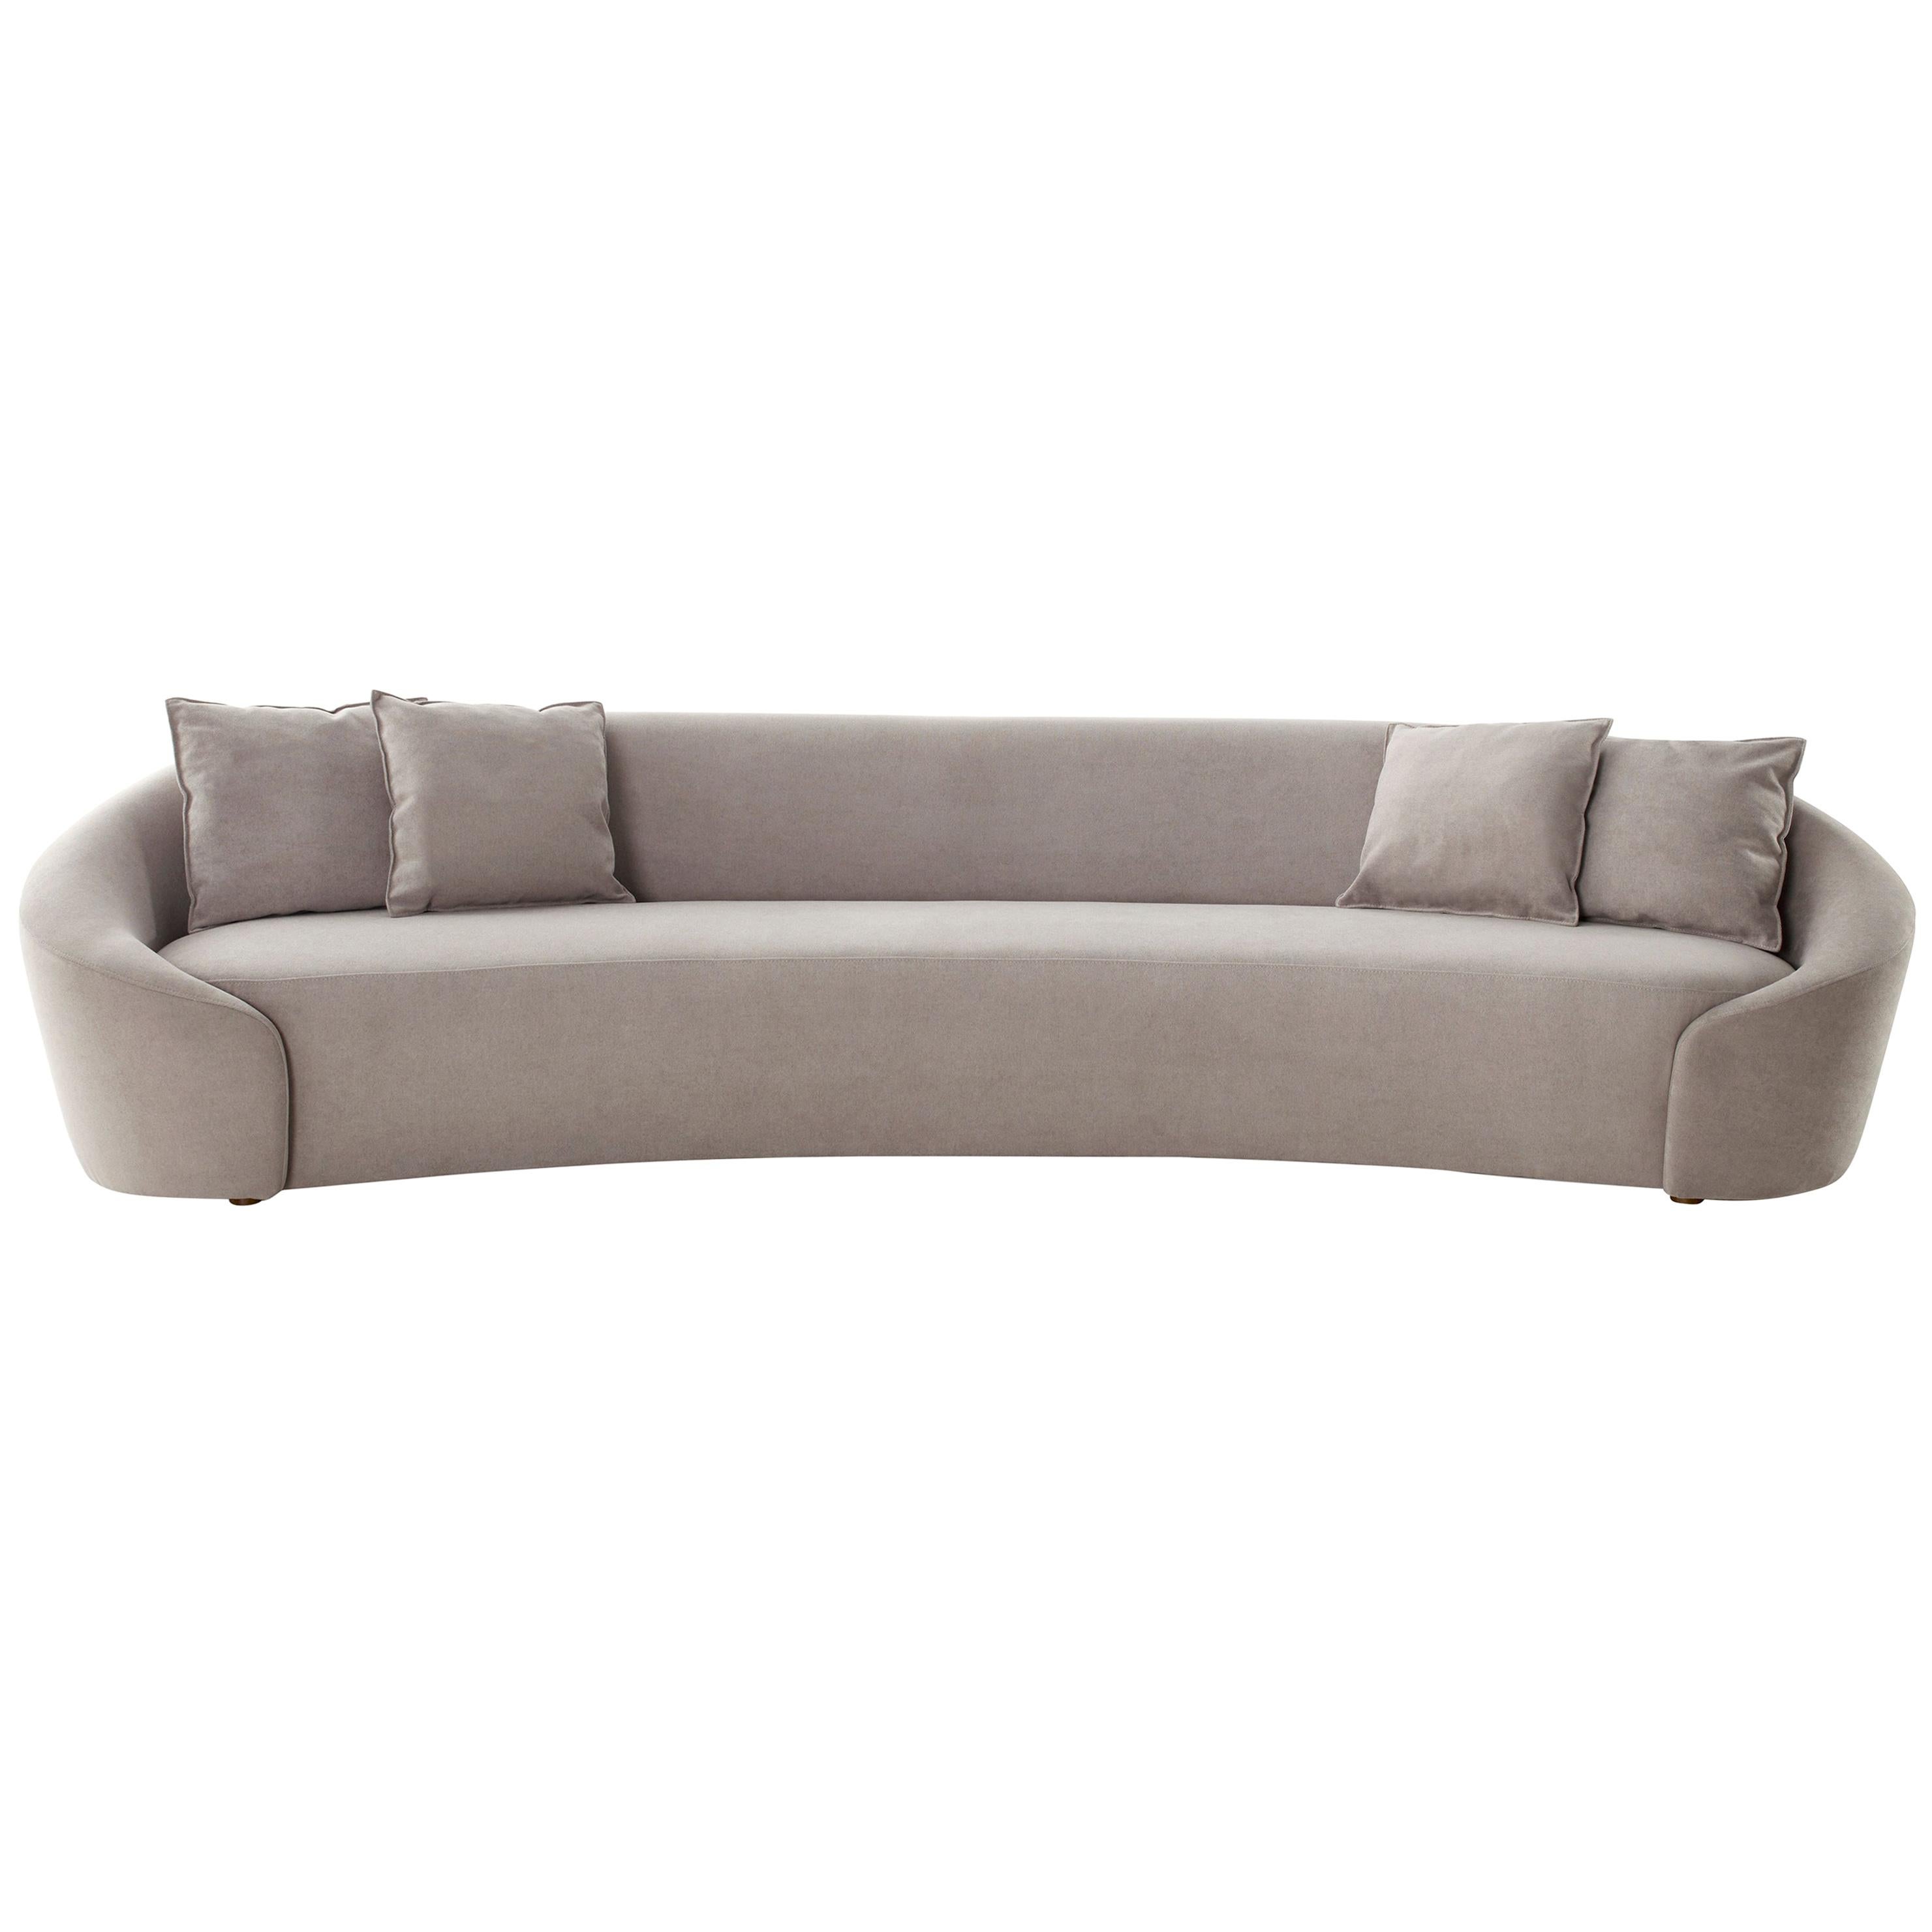 Curved Sofa, Color Dark Sand, Stone For Sale